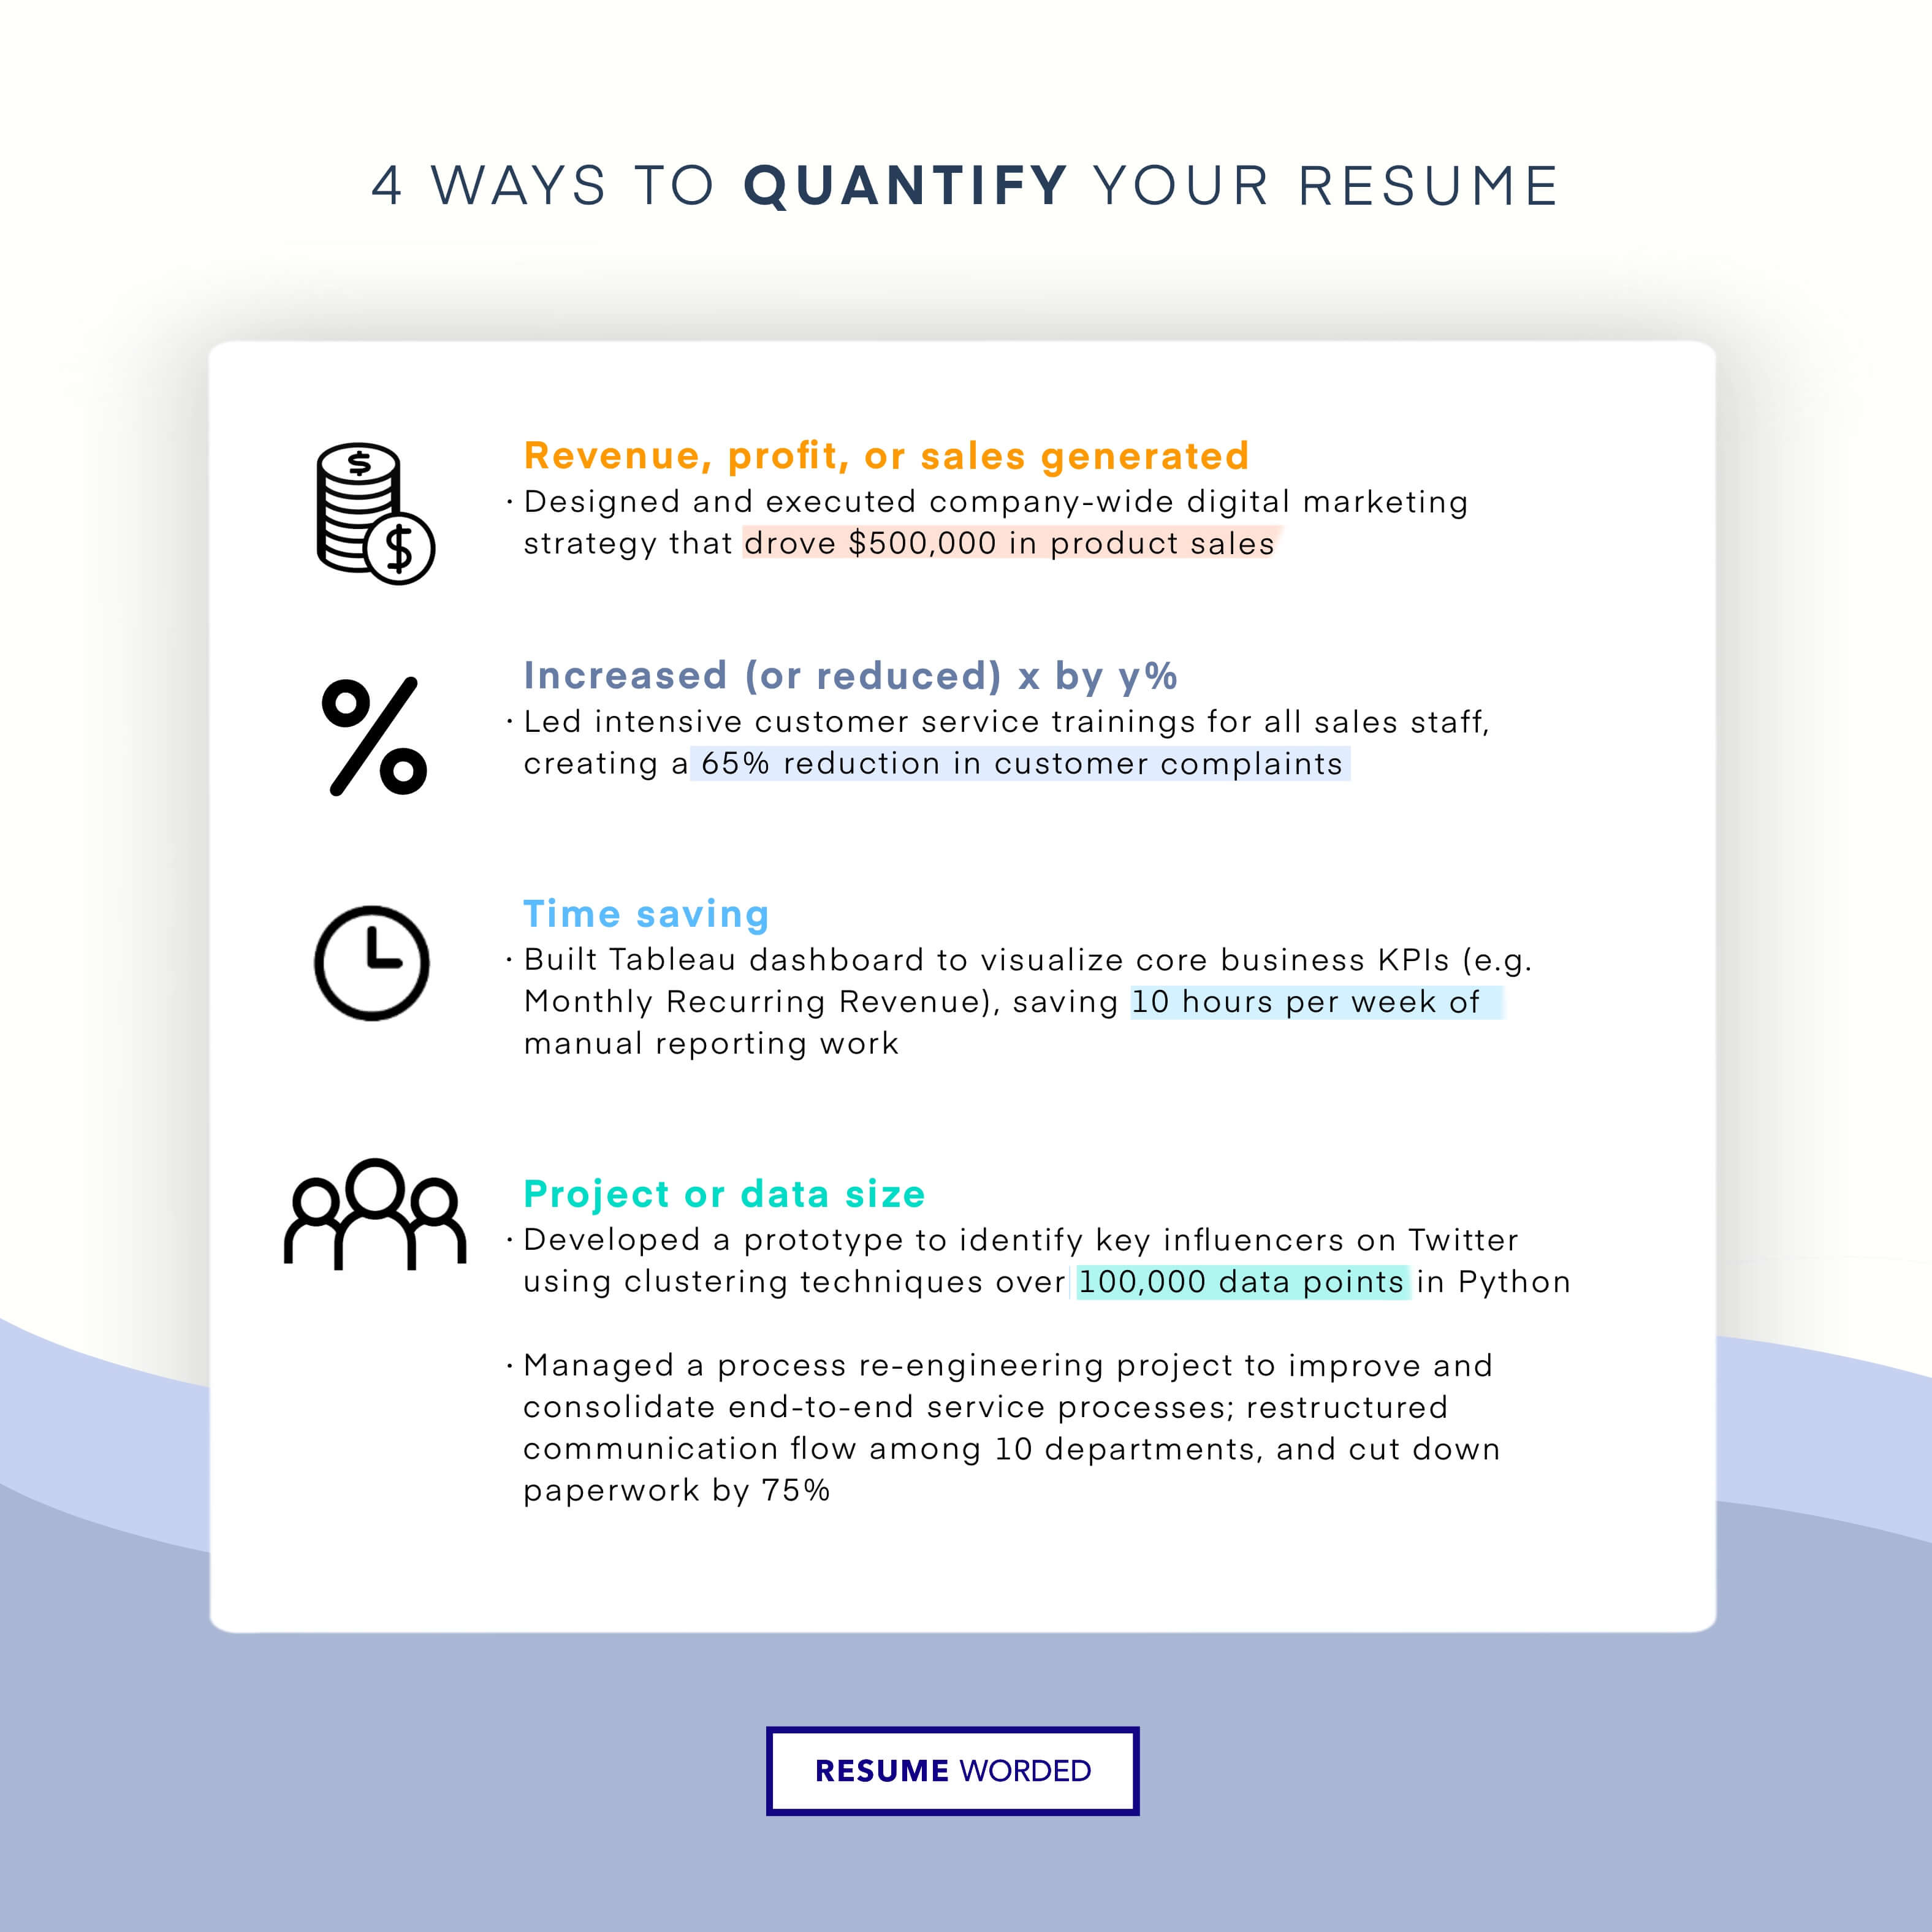 Quantify your achievements. - Warehouse Manager Resume